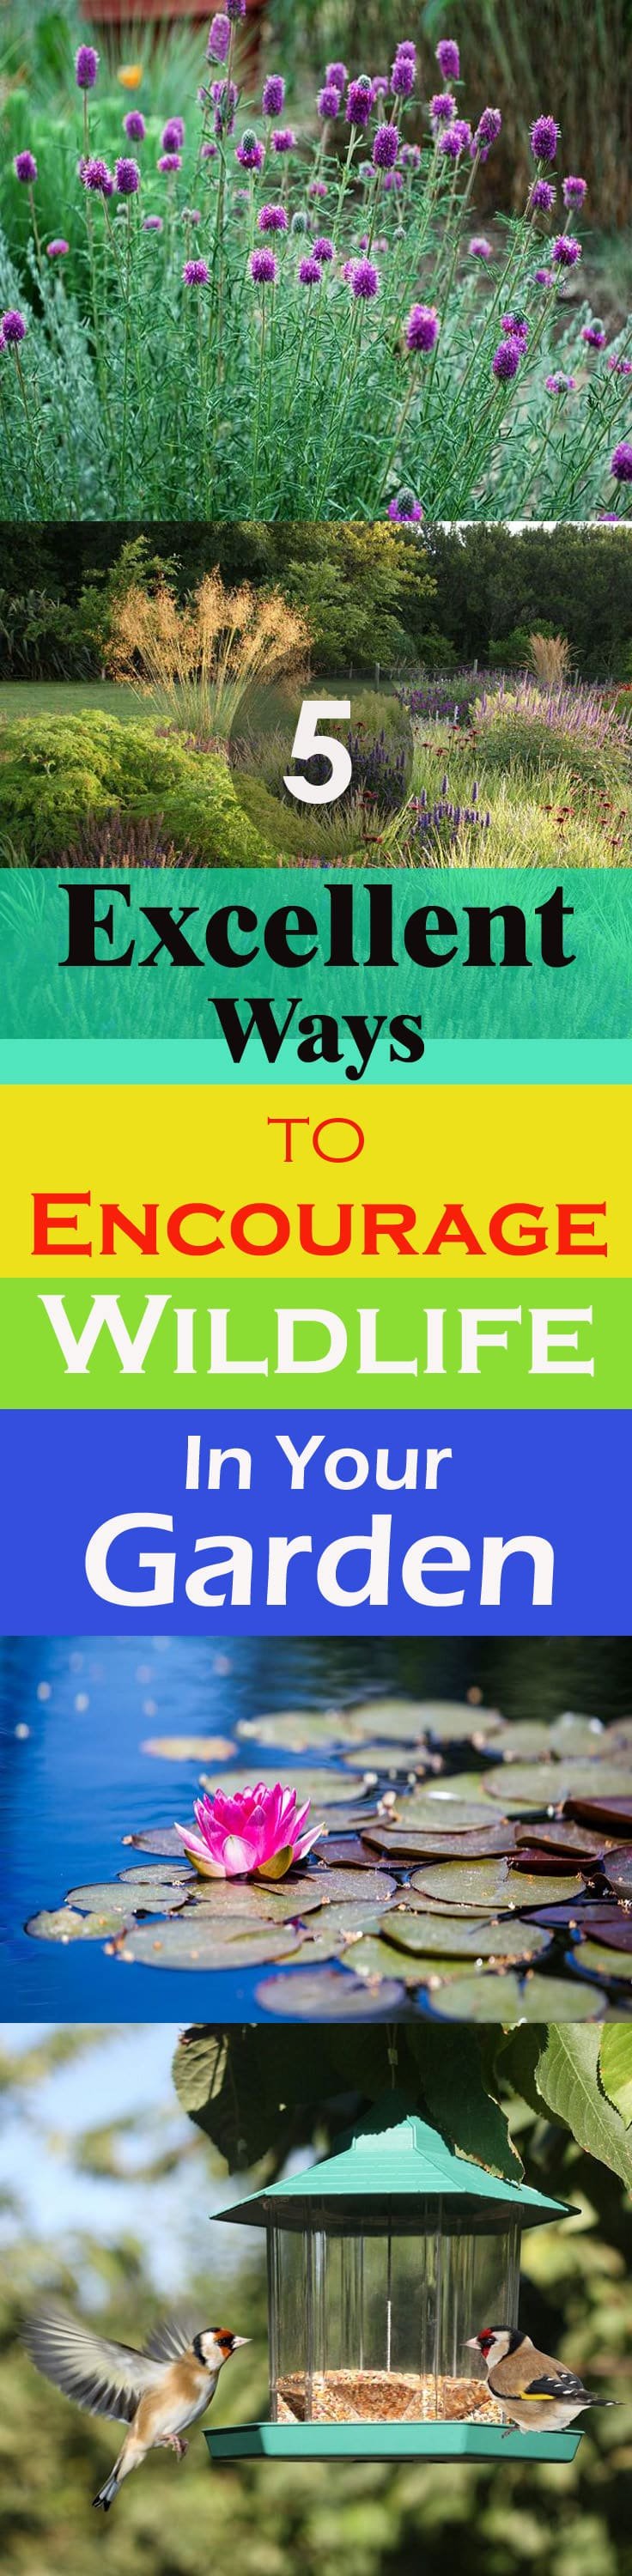 Attracting wildlife into your garden can make it more lively, it will also improve the overall health of your garden. Here are the 5 ways to do this!